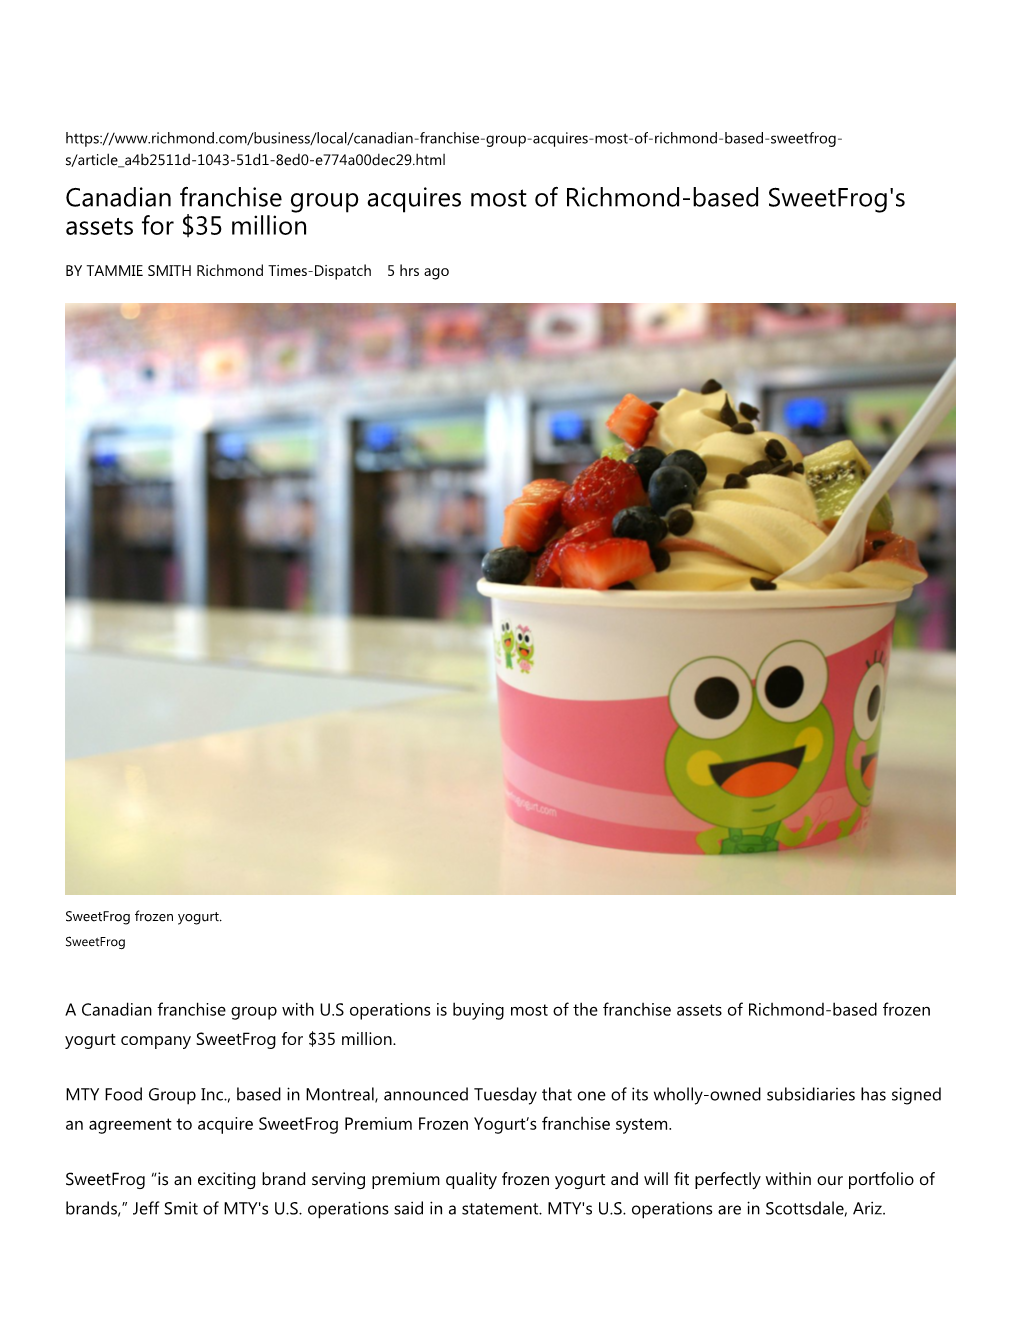 Canadian Franchise Group Acquires Most of Richmond-Based Sweetfrog's Assets for $35 Million